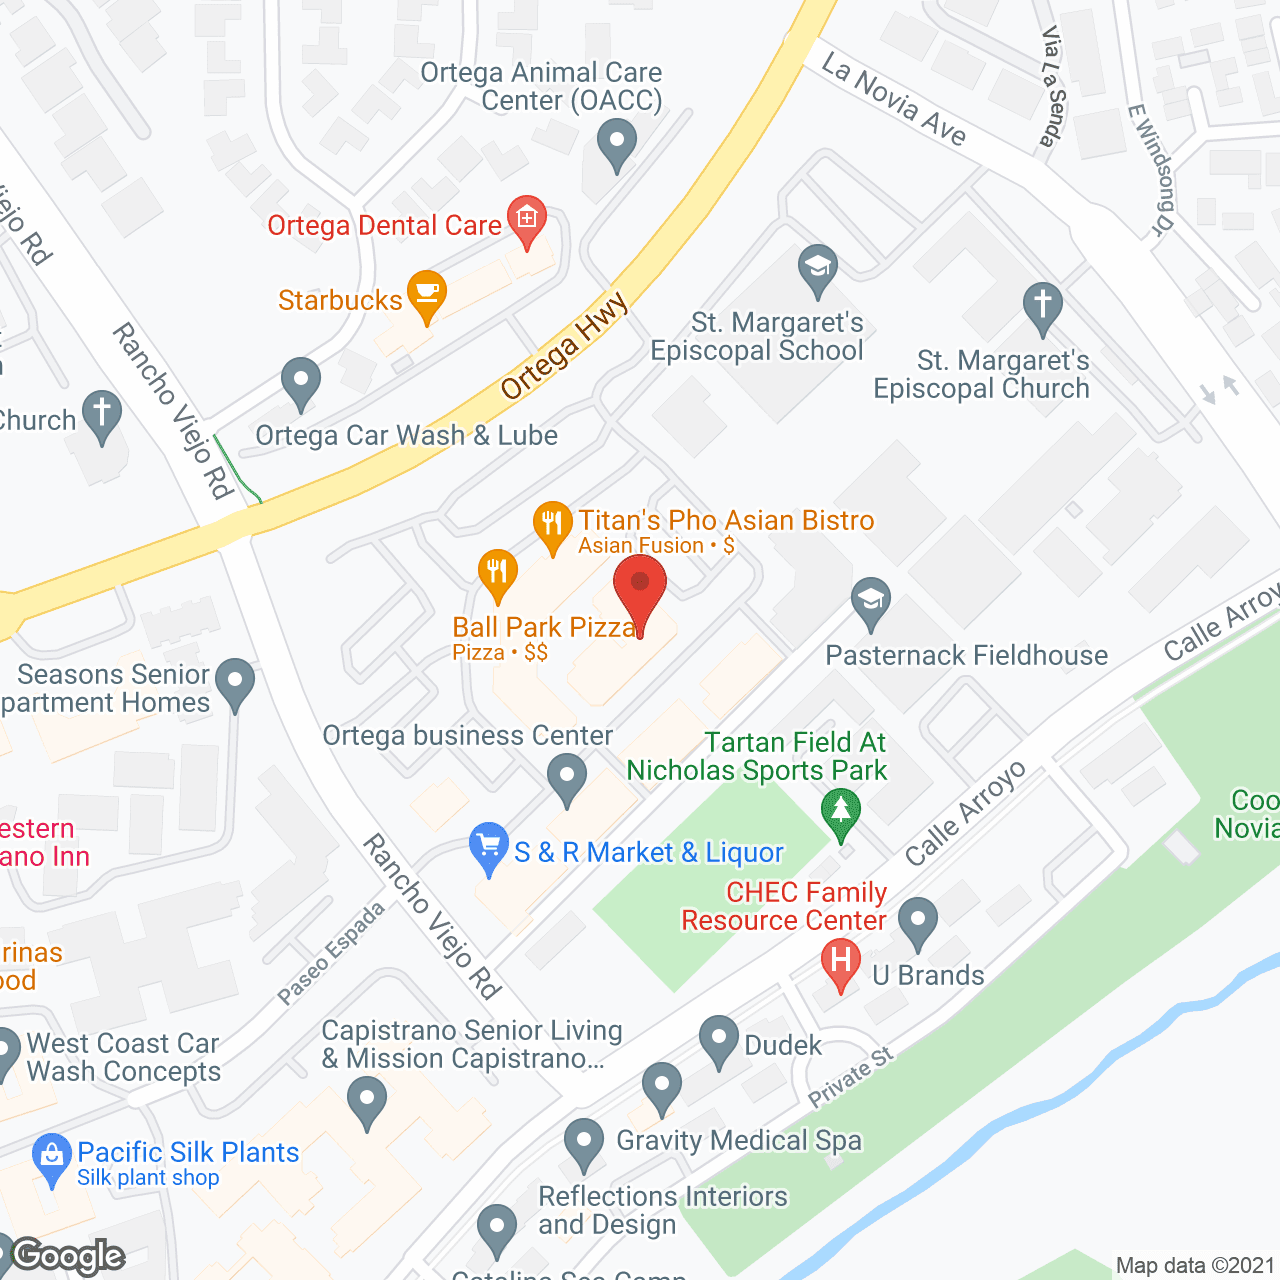 Care Assist Services in google map